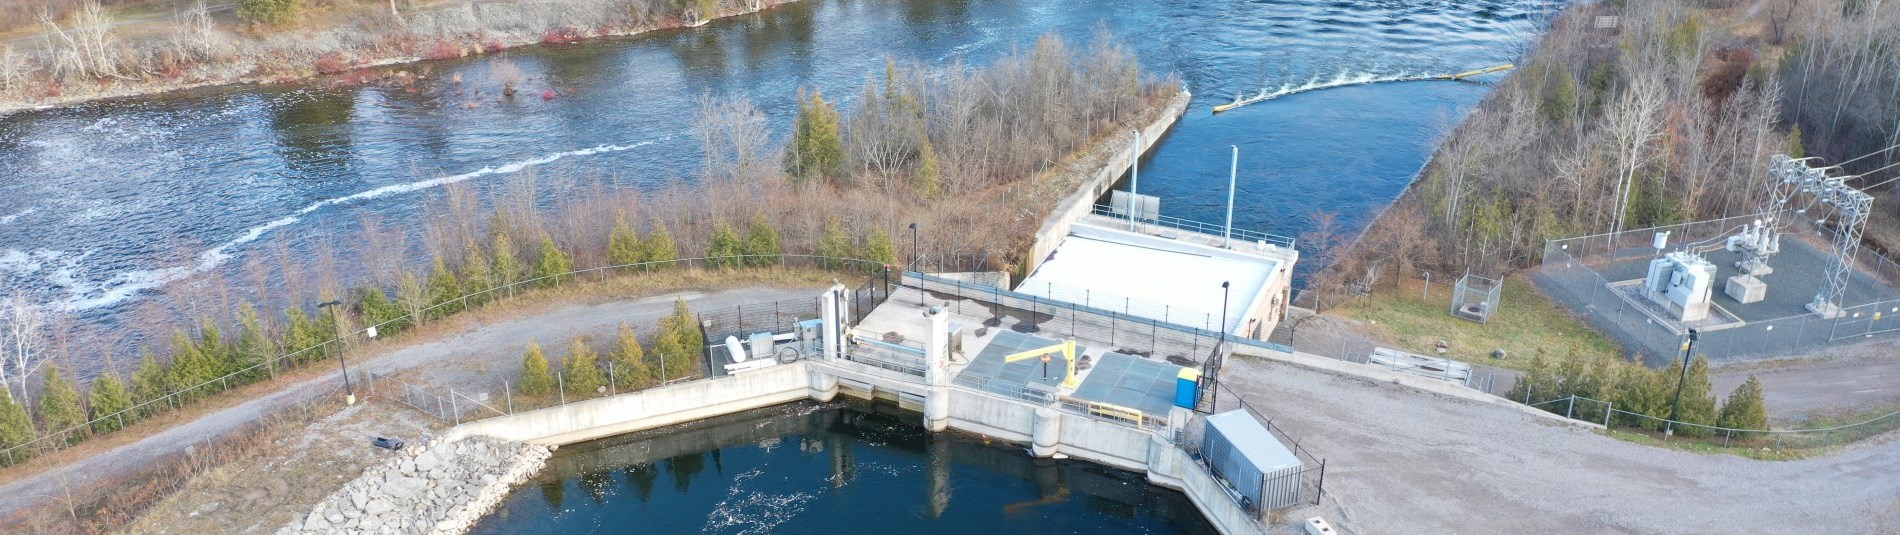 Intake channel to Robert G. Lake Generation Station and Lock 23 Dam on the Otonabee River